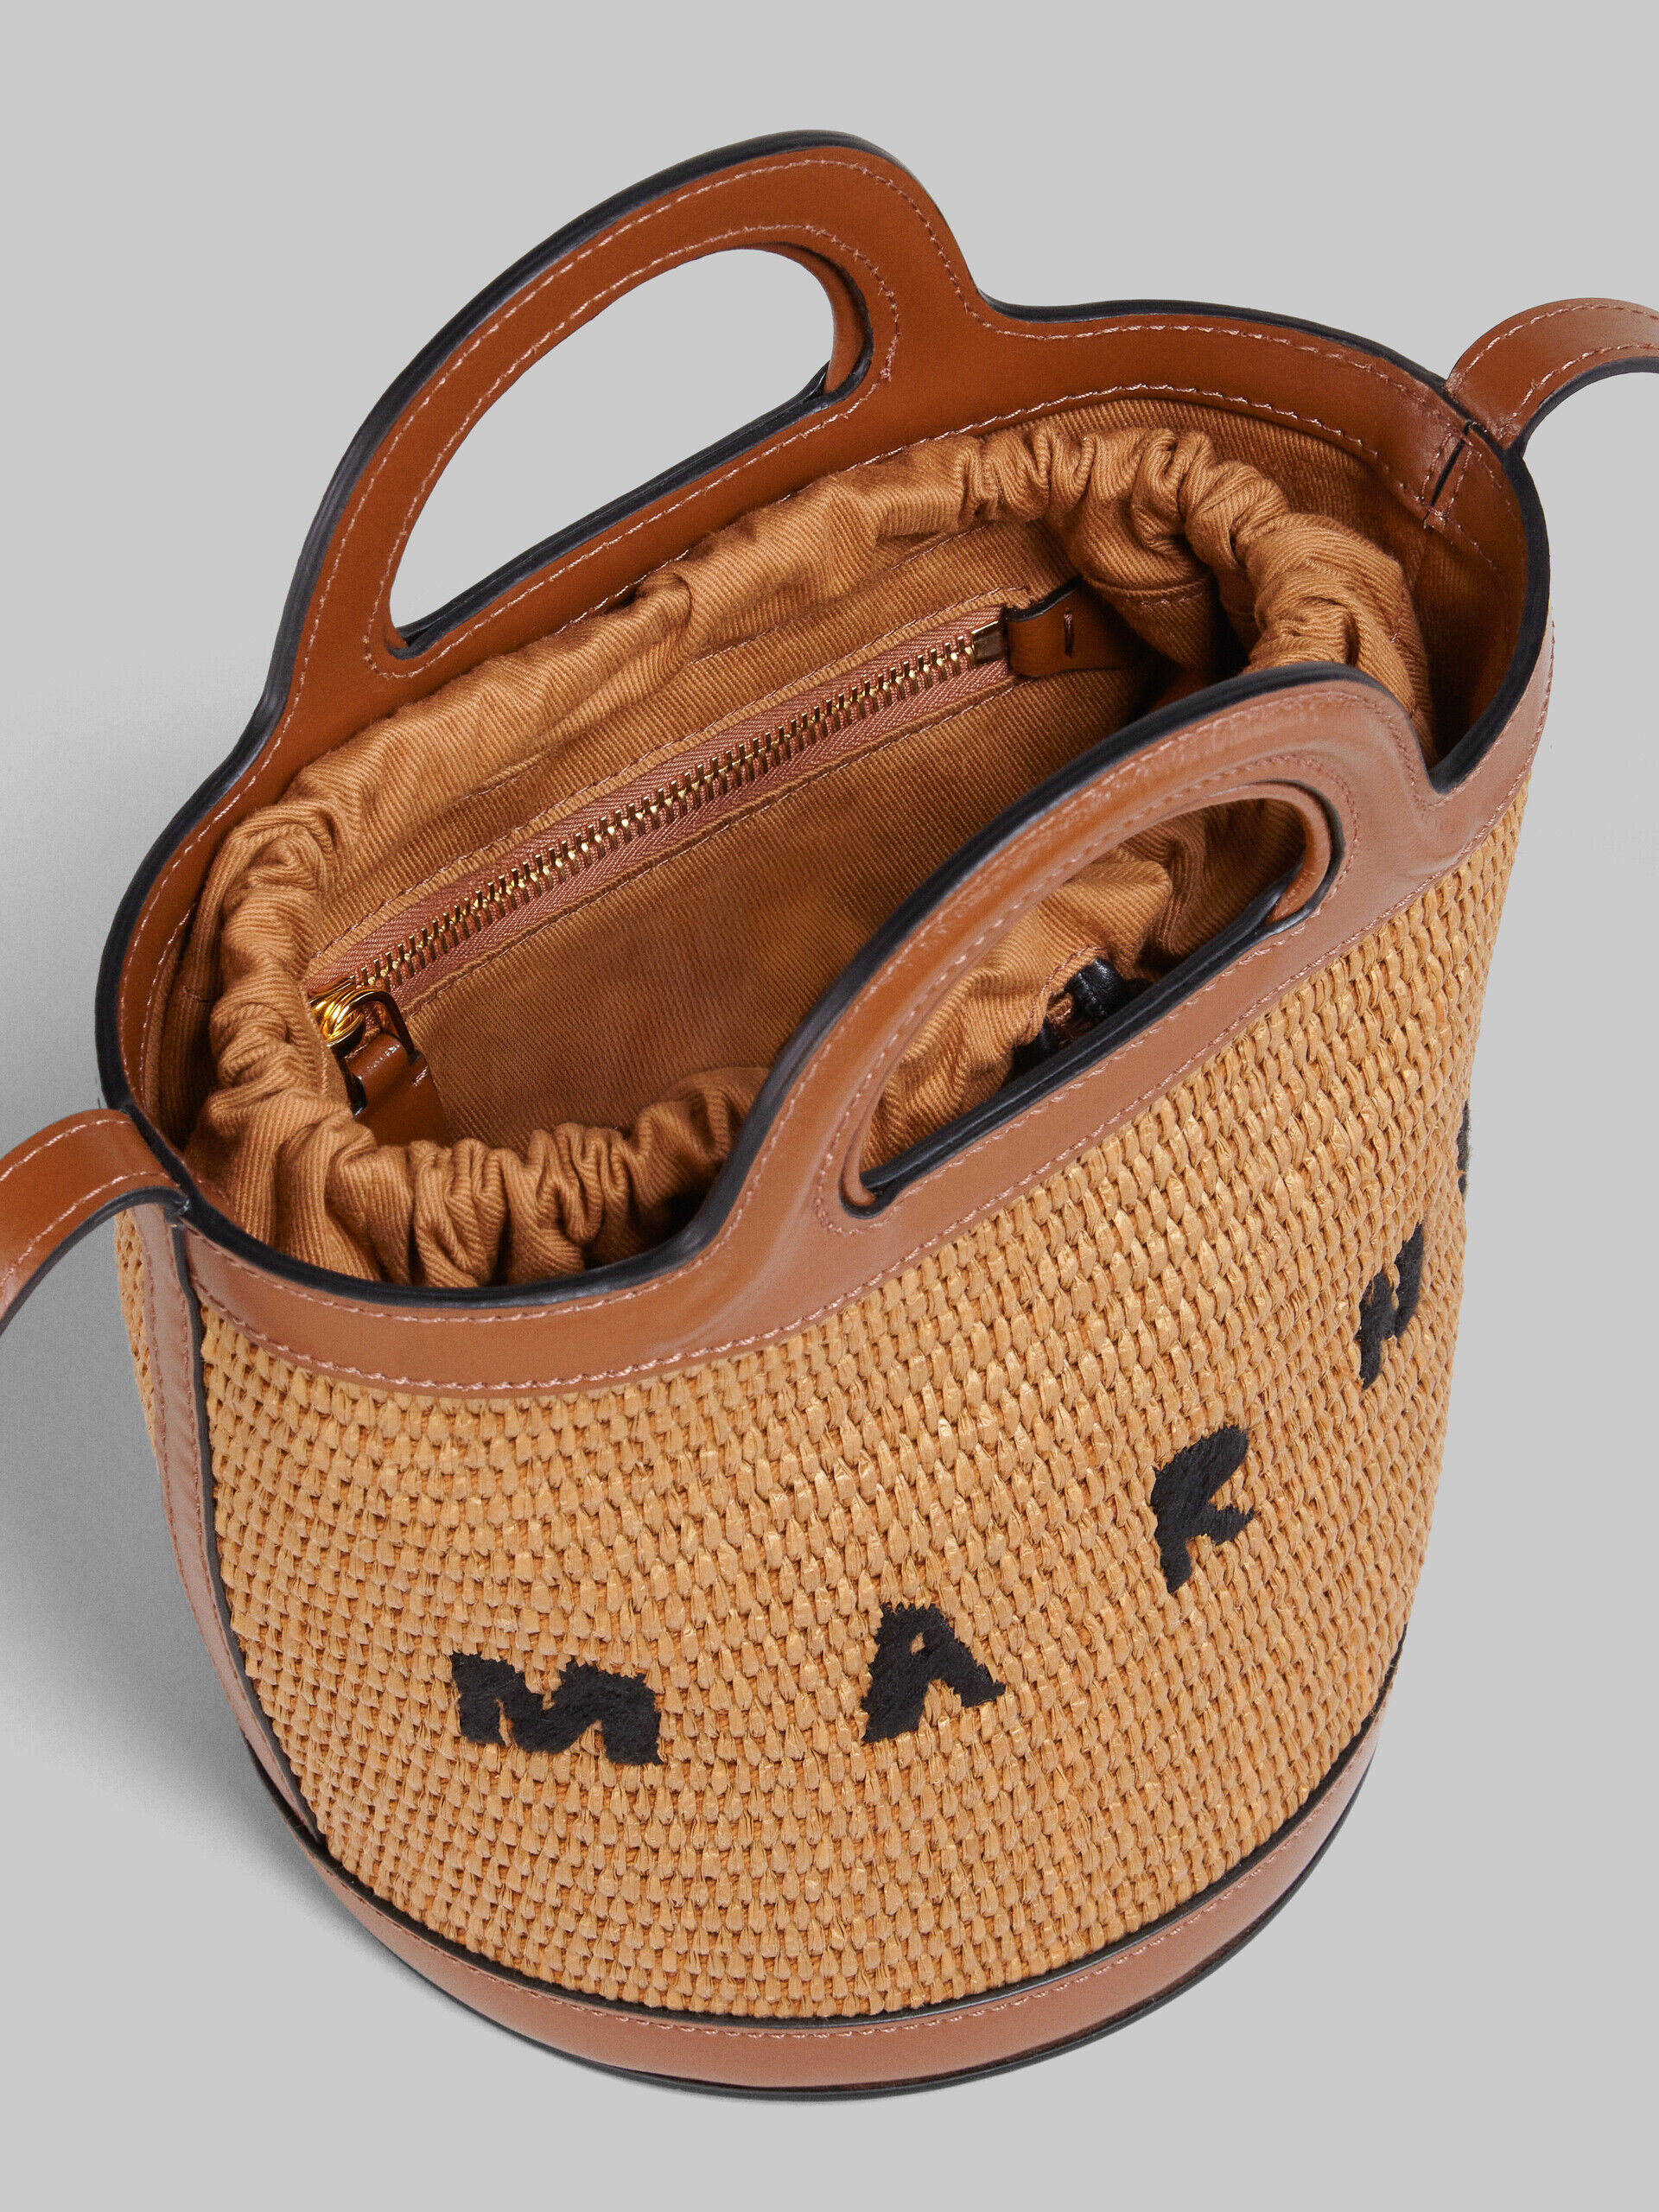 Tropicalia Small Bucket Bag in brown leather and raffia-effect